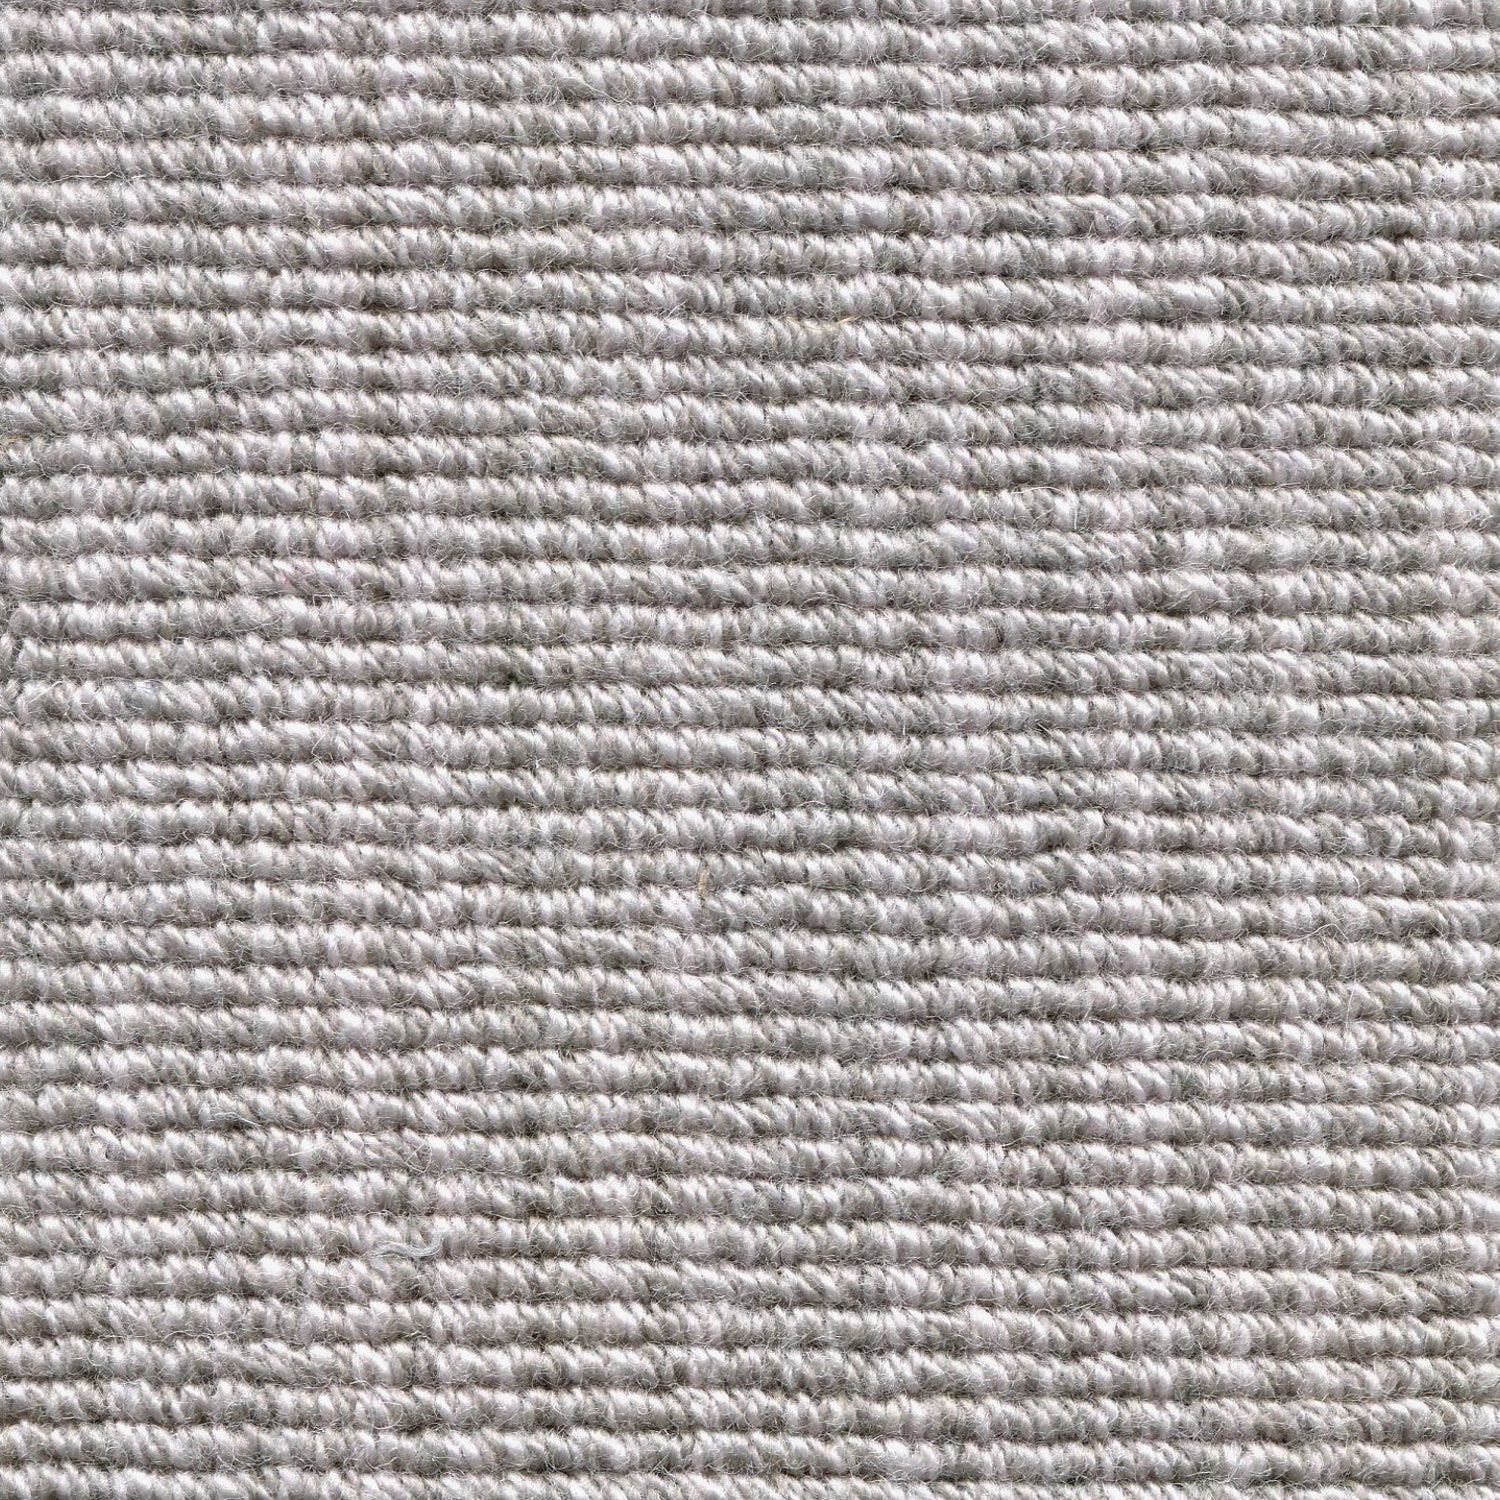 Wool broadloom carpet swatch in a chunky striped weave in two shades of gray.